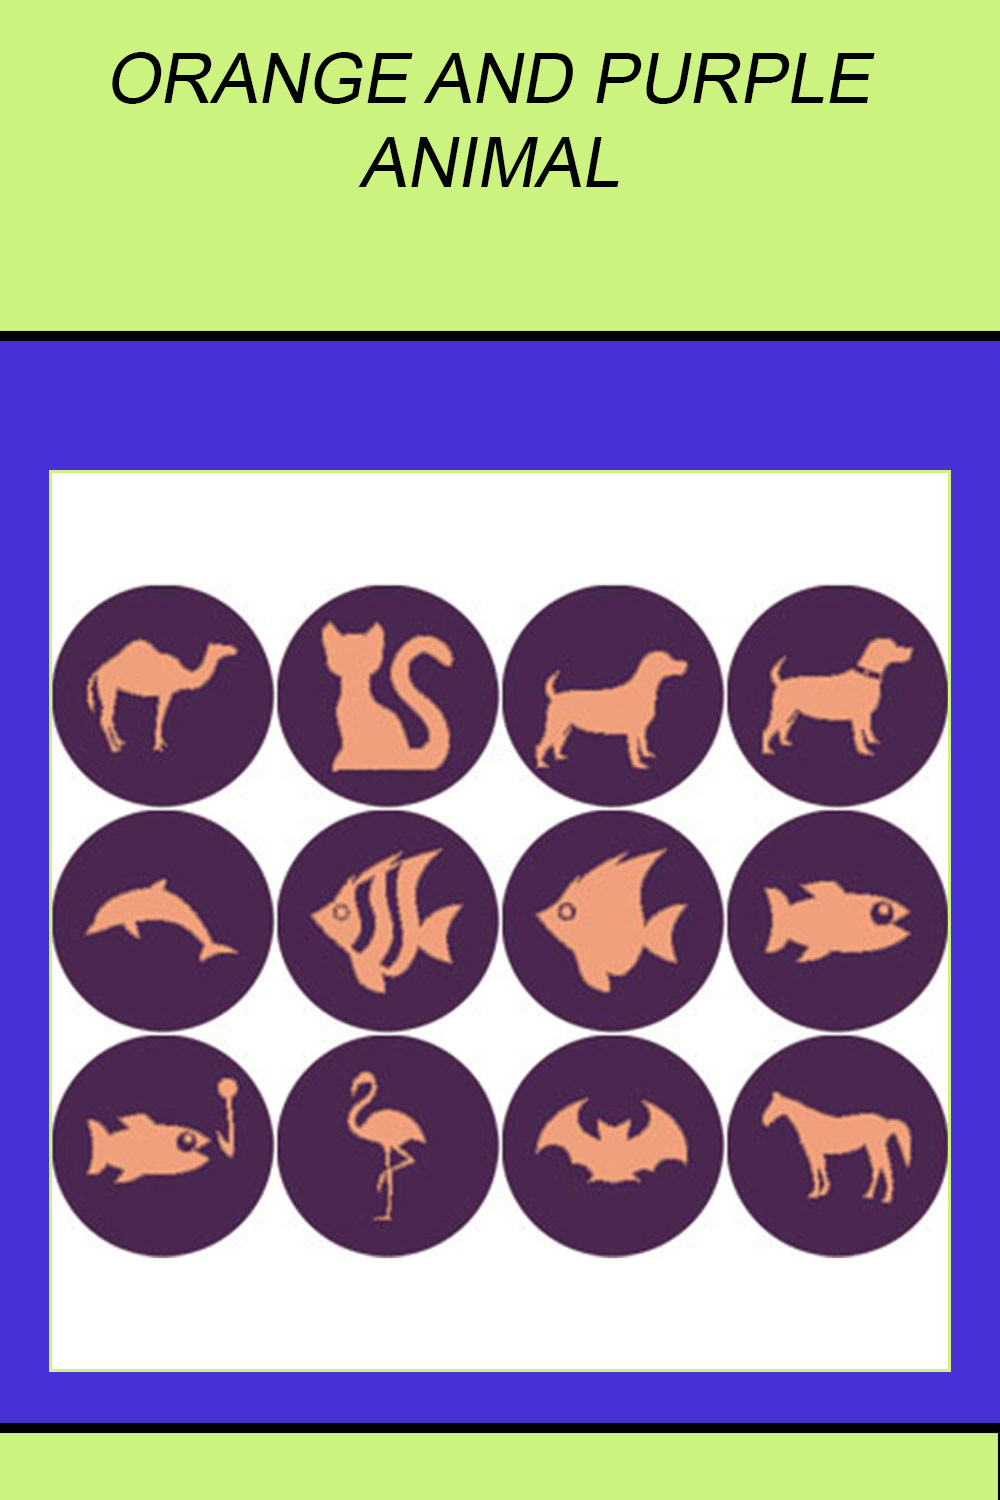 ORANGE AND PURPLE ANIMAL ROUND ICONS pinterest preview image.